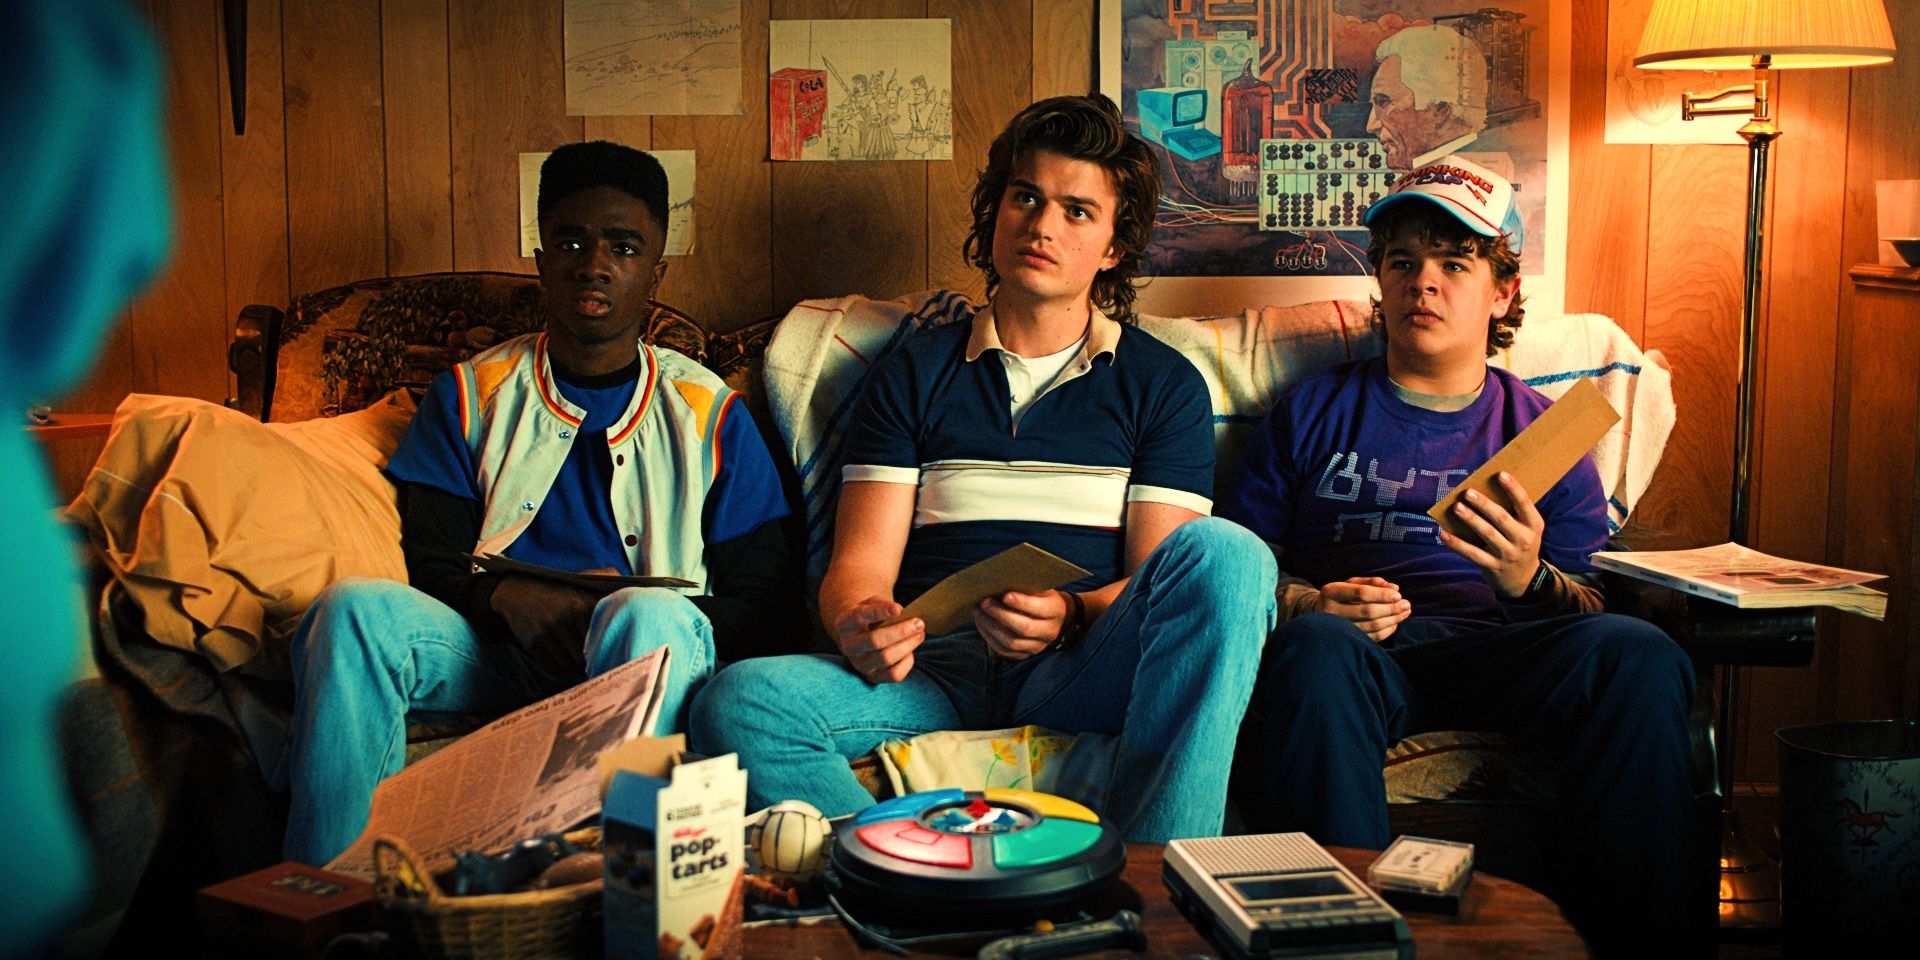 Lucas, Steve, and Dustin on the couch in Stranger Things season 4